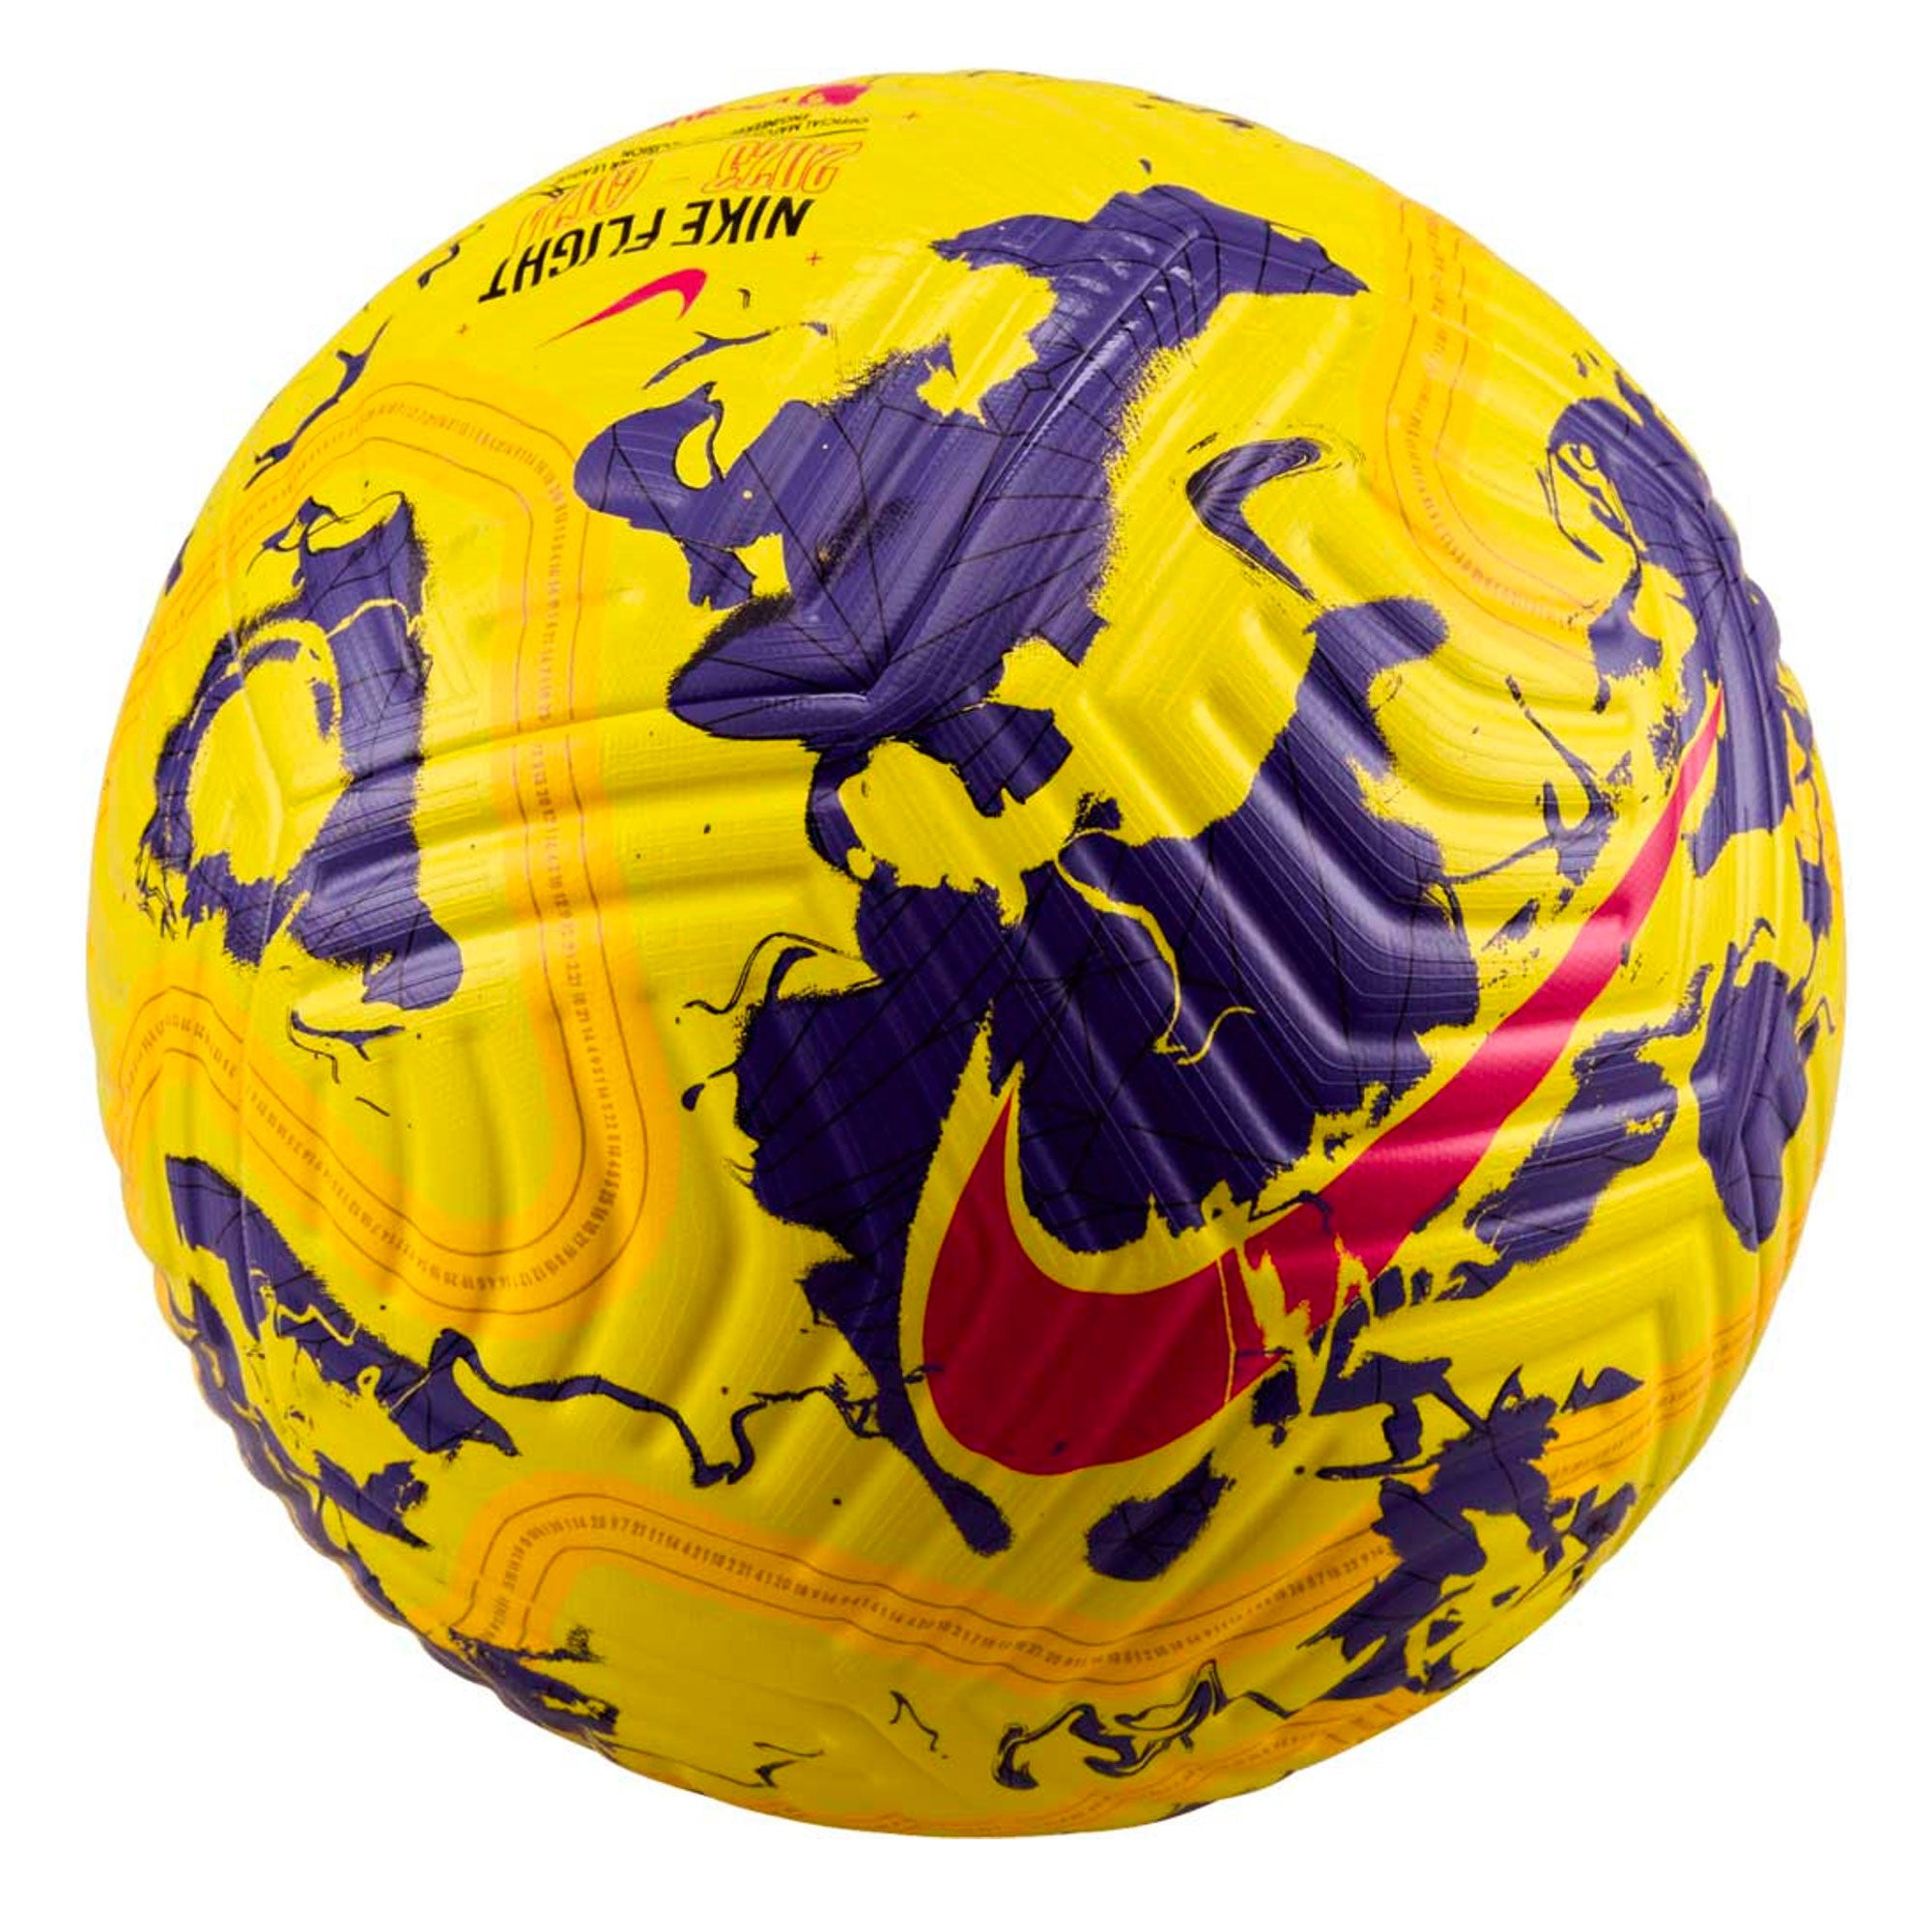 Nike FC Barcelona Soccer Ball, Volt Yellow, Size 4 - NEW! FAST! FREE  SHIPPING!